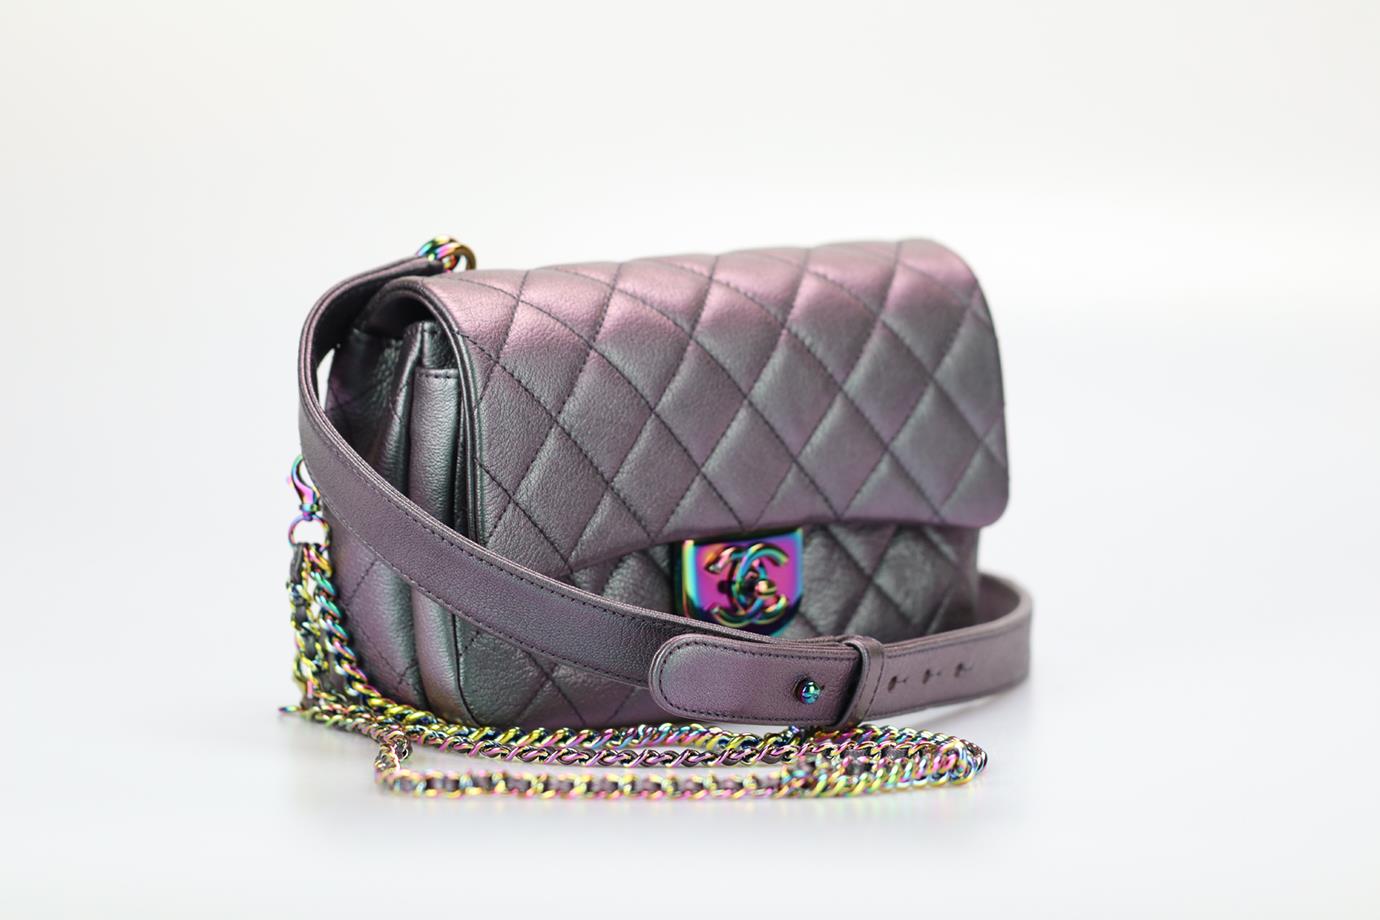 CHANEL 2016 DOUBLE CARRY WAIST CHAIN FLAP SMALL IRISDESCENT QUILTED LEATHER CROSSBODY BAG